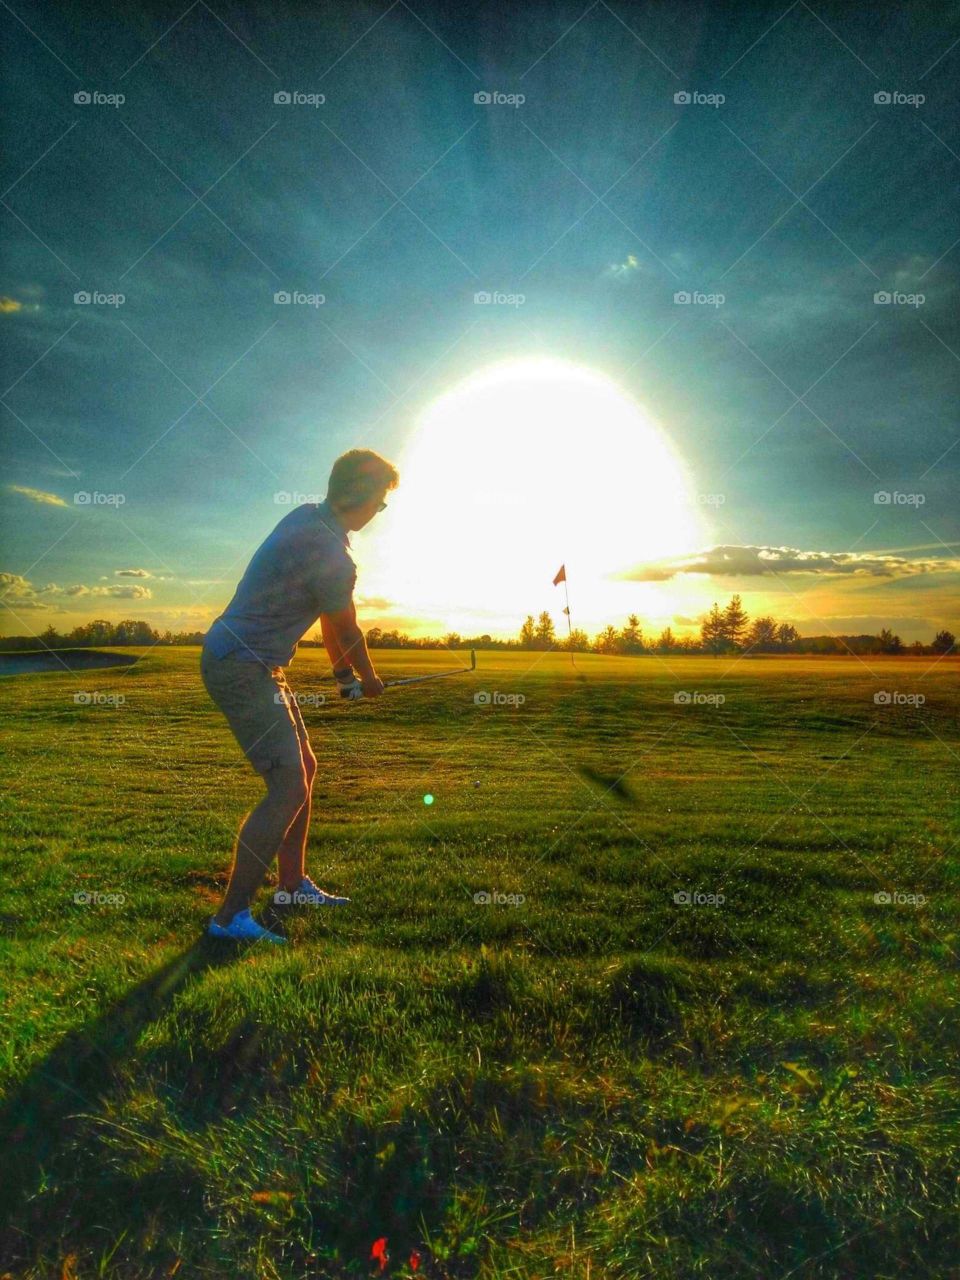 sunset on the golf course